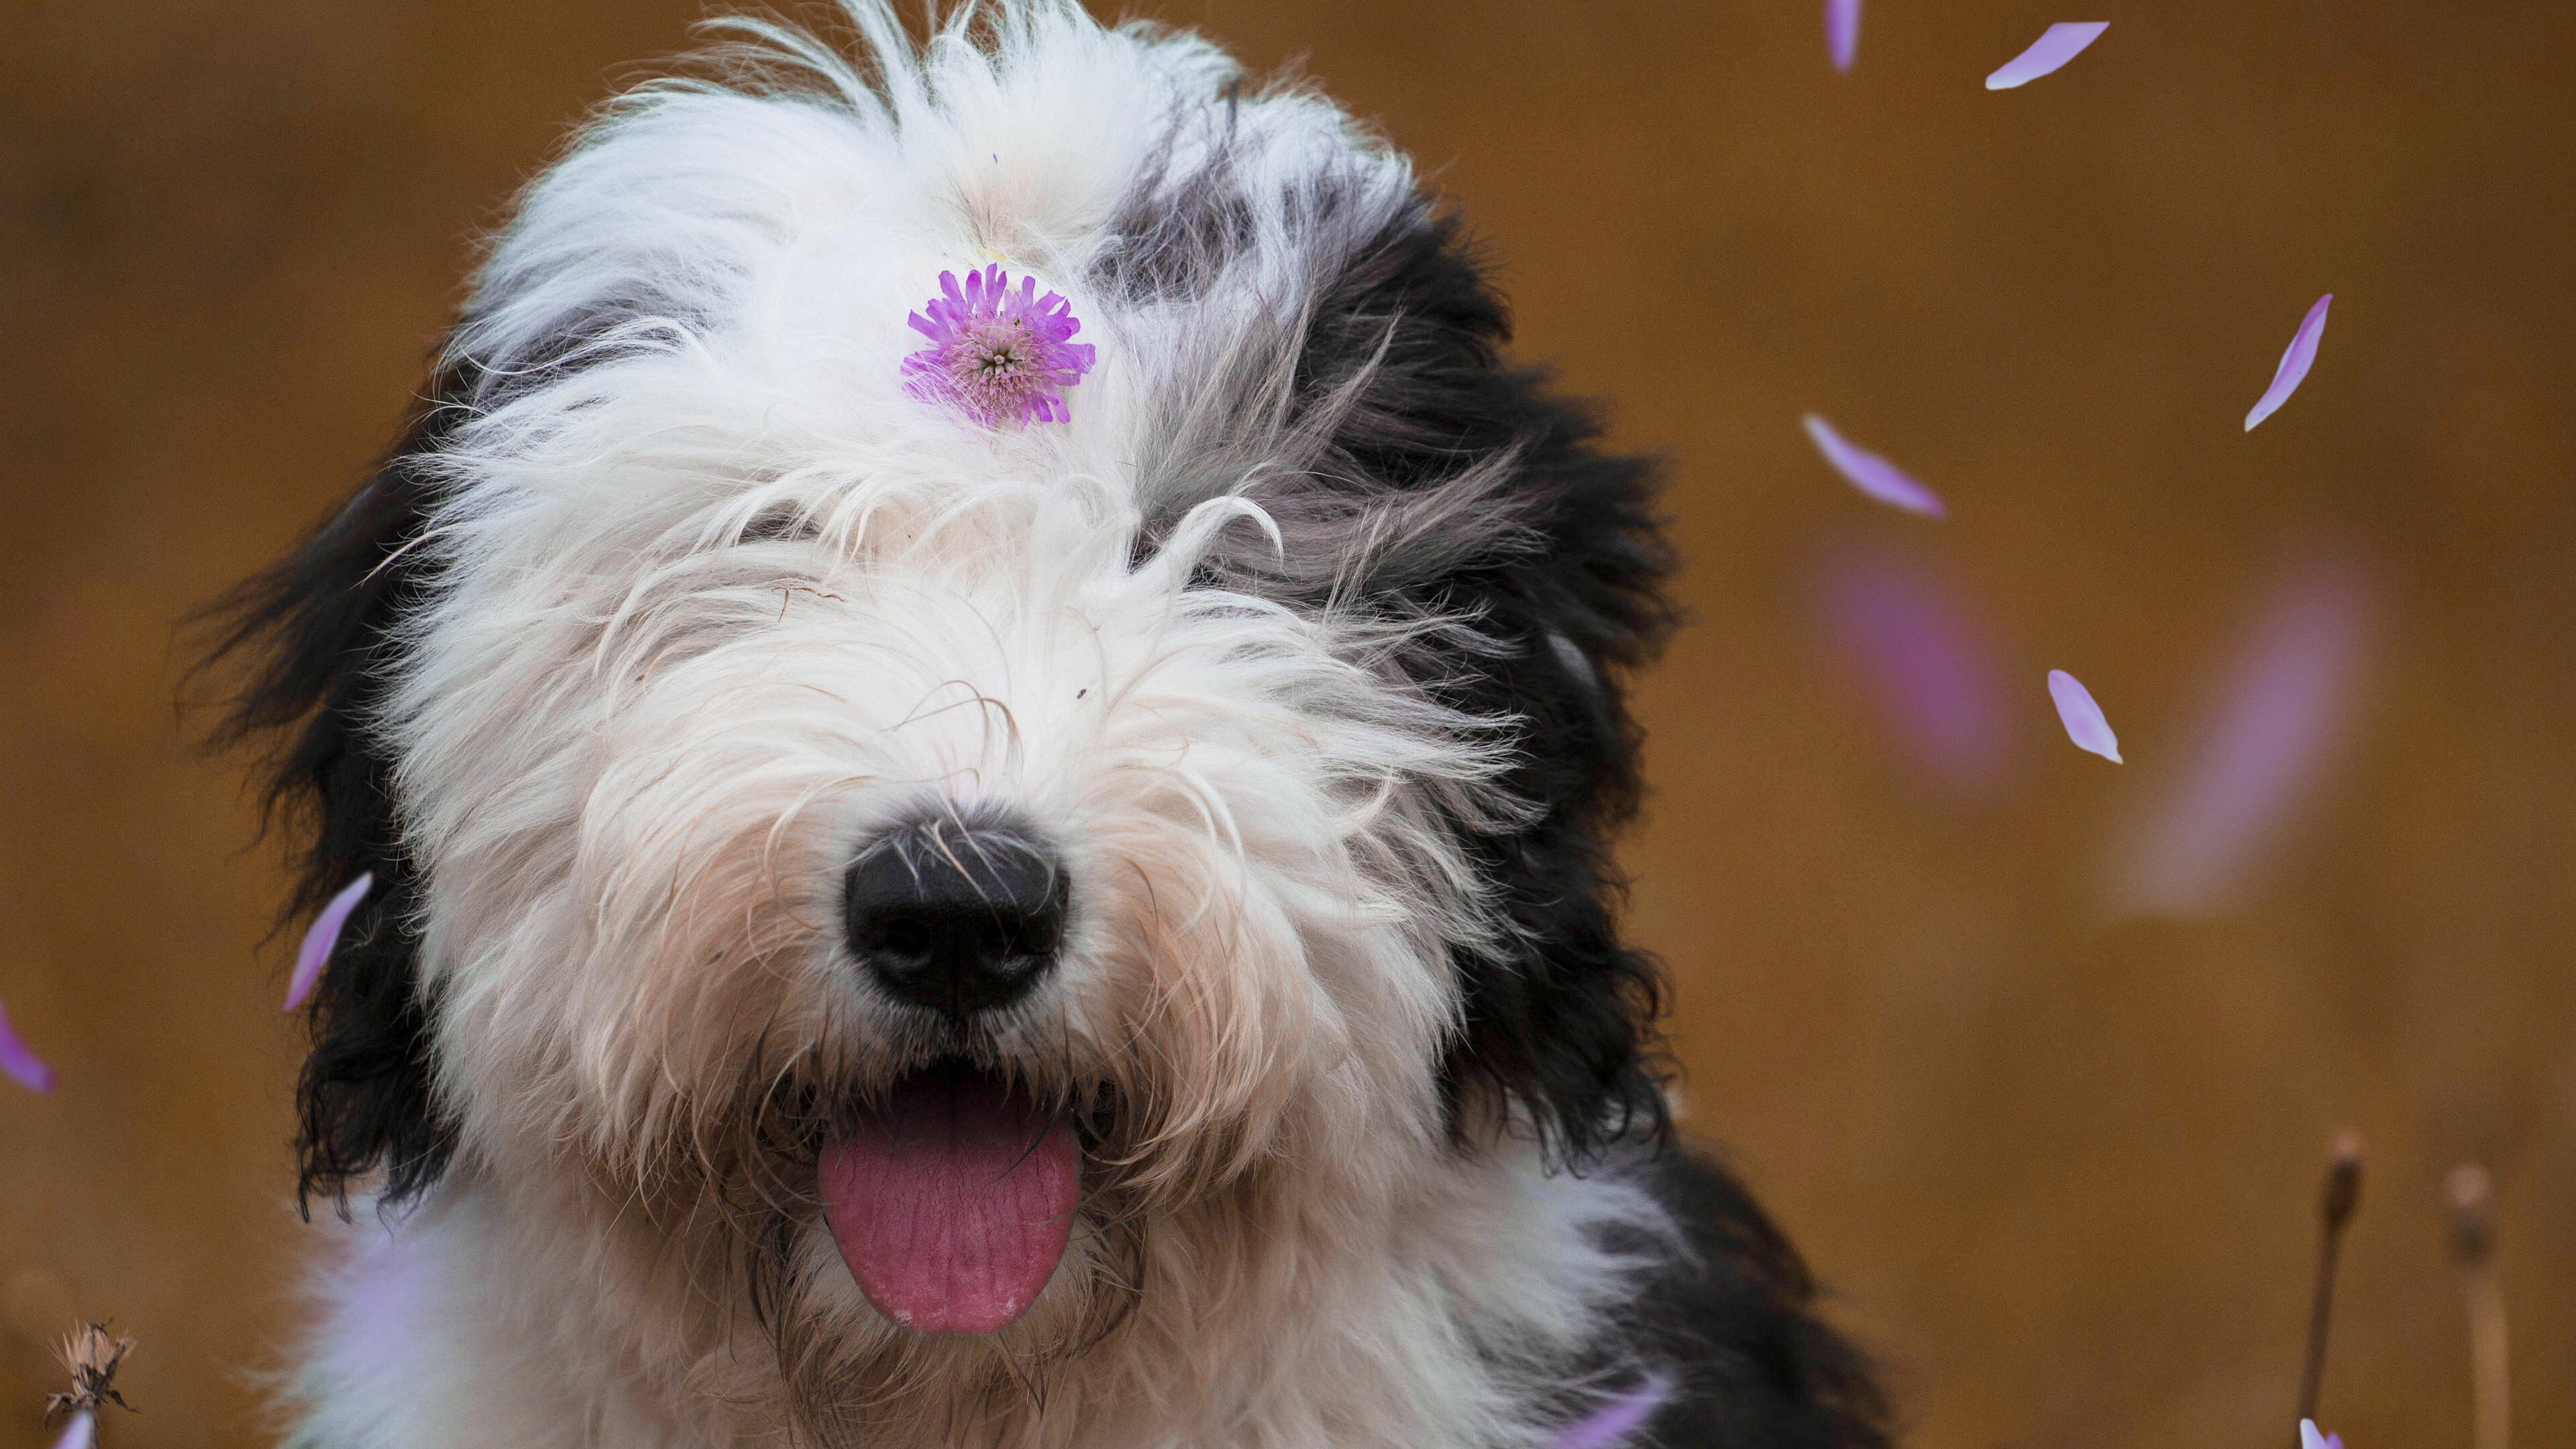 Dog: Old English Sheepdog, A large breed, emerged in England. 3840x2160 4K Wallpaper.